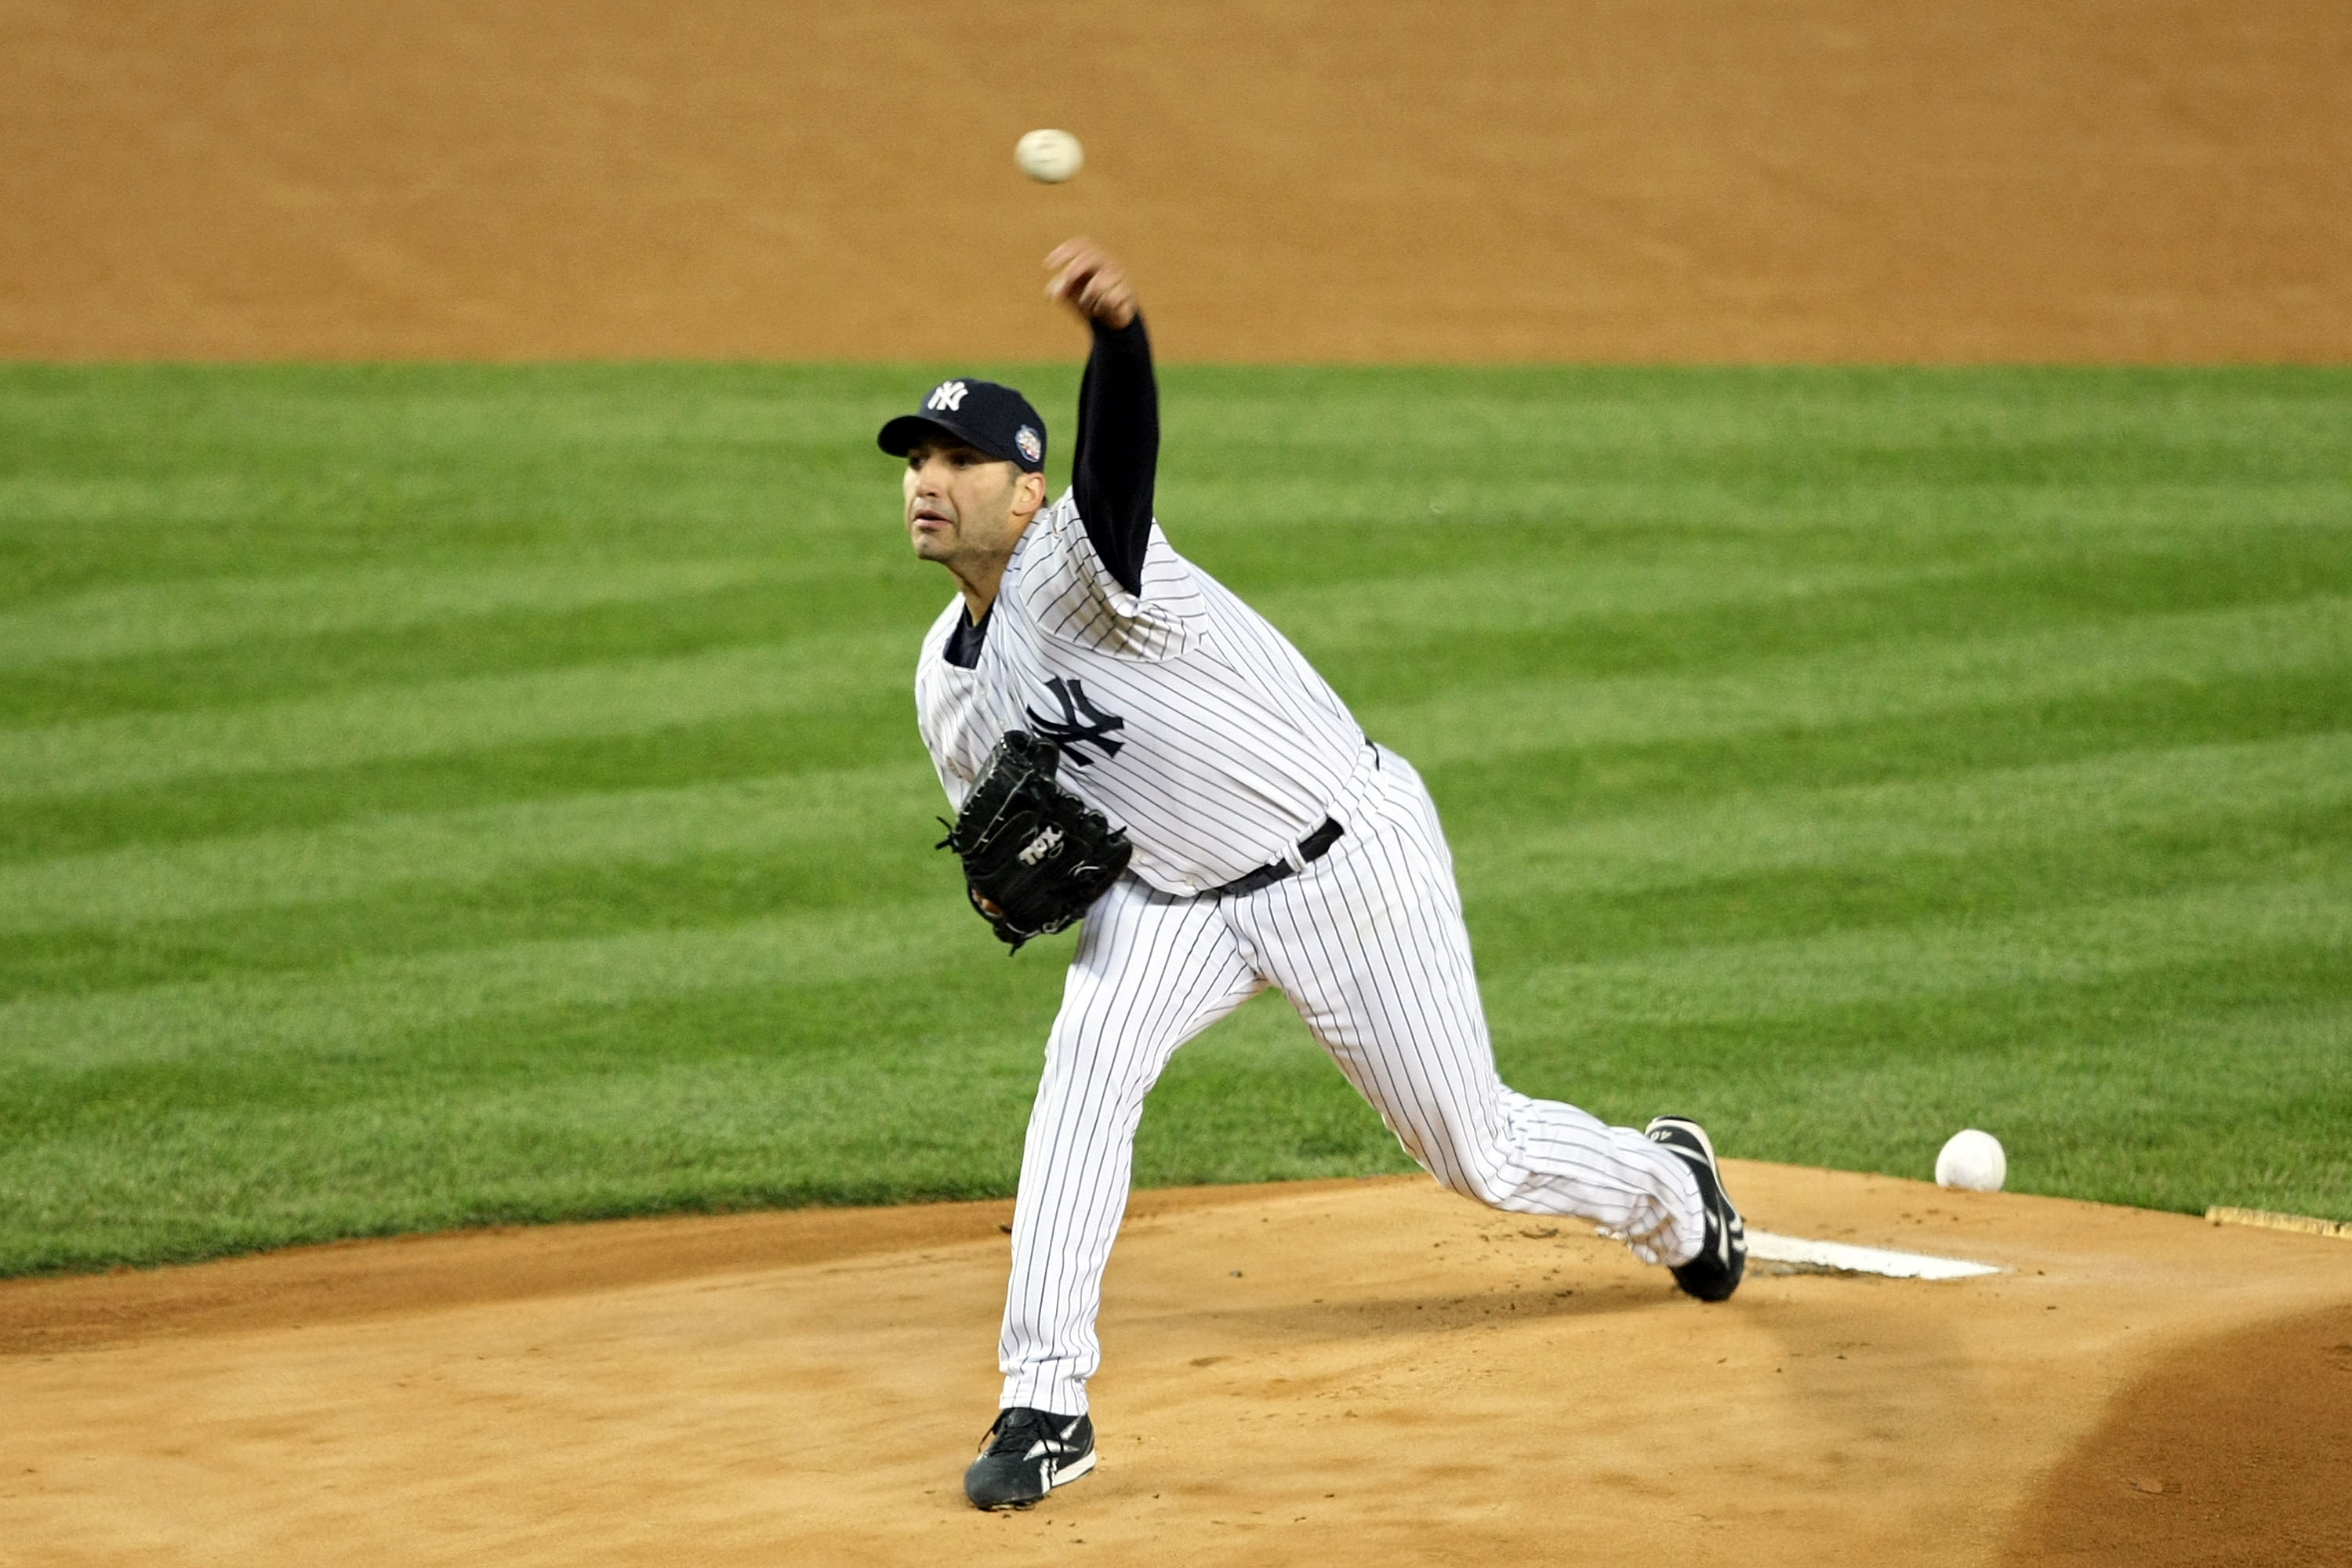 NEW YORK - NOVEMBER 04:  Starting pitcher Andy Pettitte #46 of the New York Yankees throws a pitch against the Philadelphia Phillies in Game Six of the 2009 MLB World Series at Yankee Stadium on November 4, 2009 in the Bronx borough of New York City.  (Ph